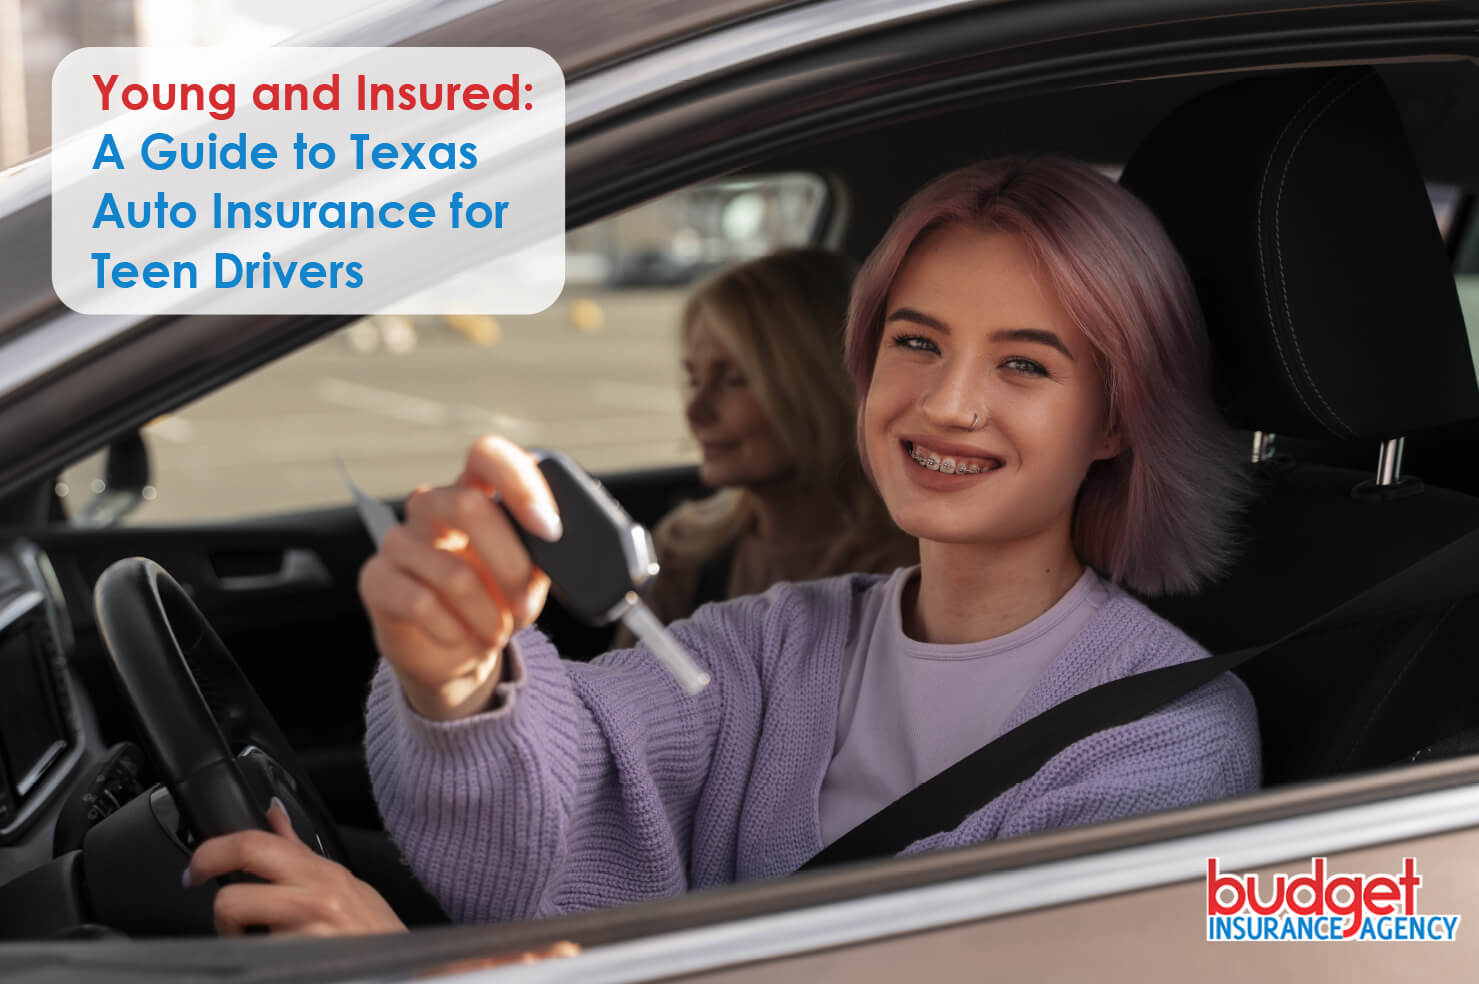 Young and Insured: A Guide to Texas Auto Insurance for Teen Drivers